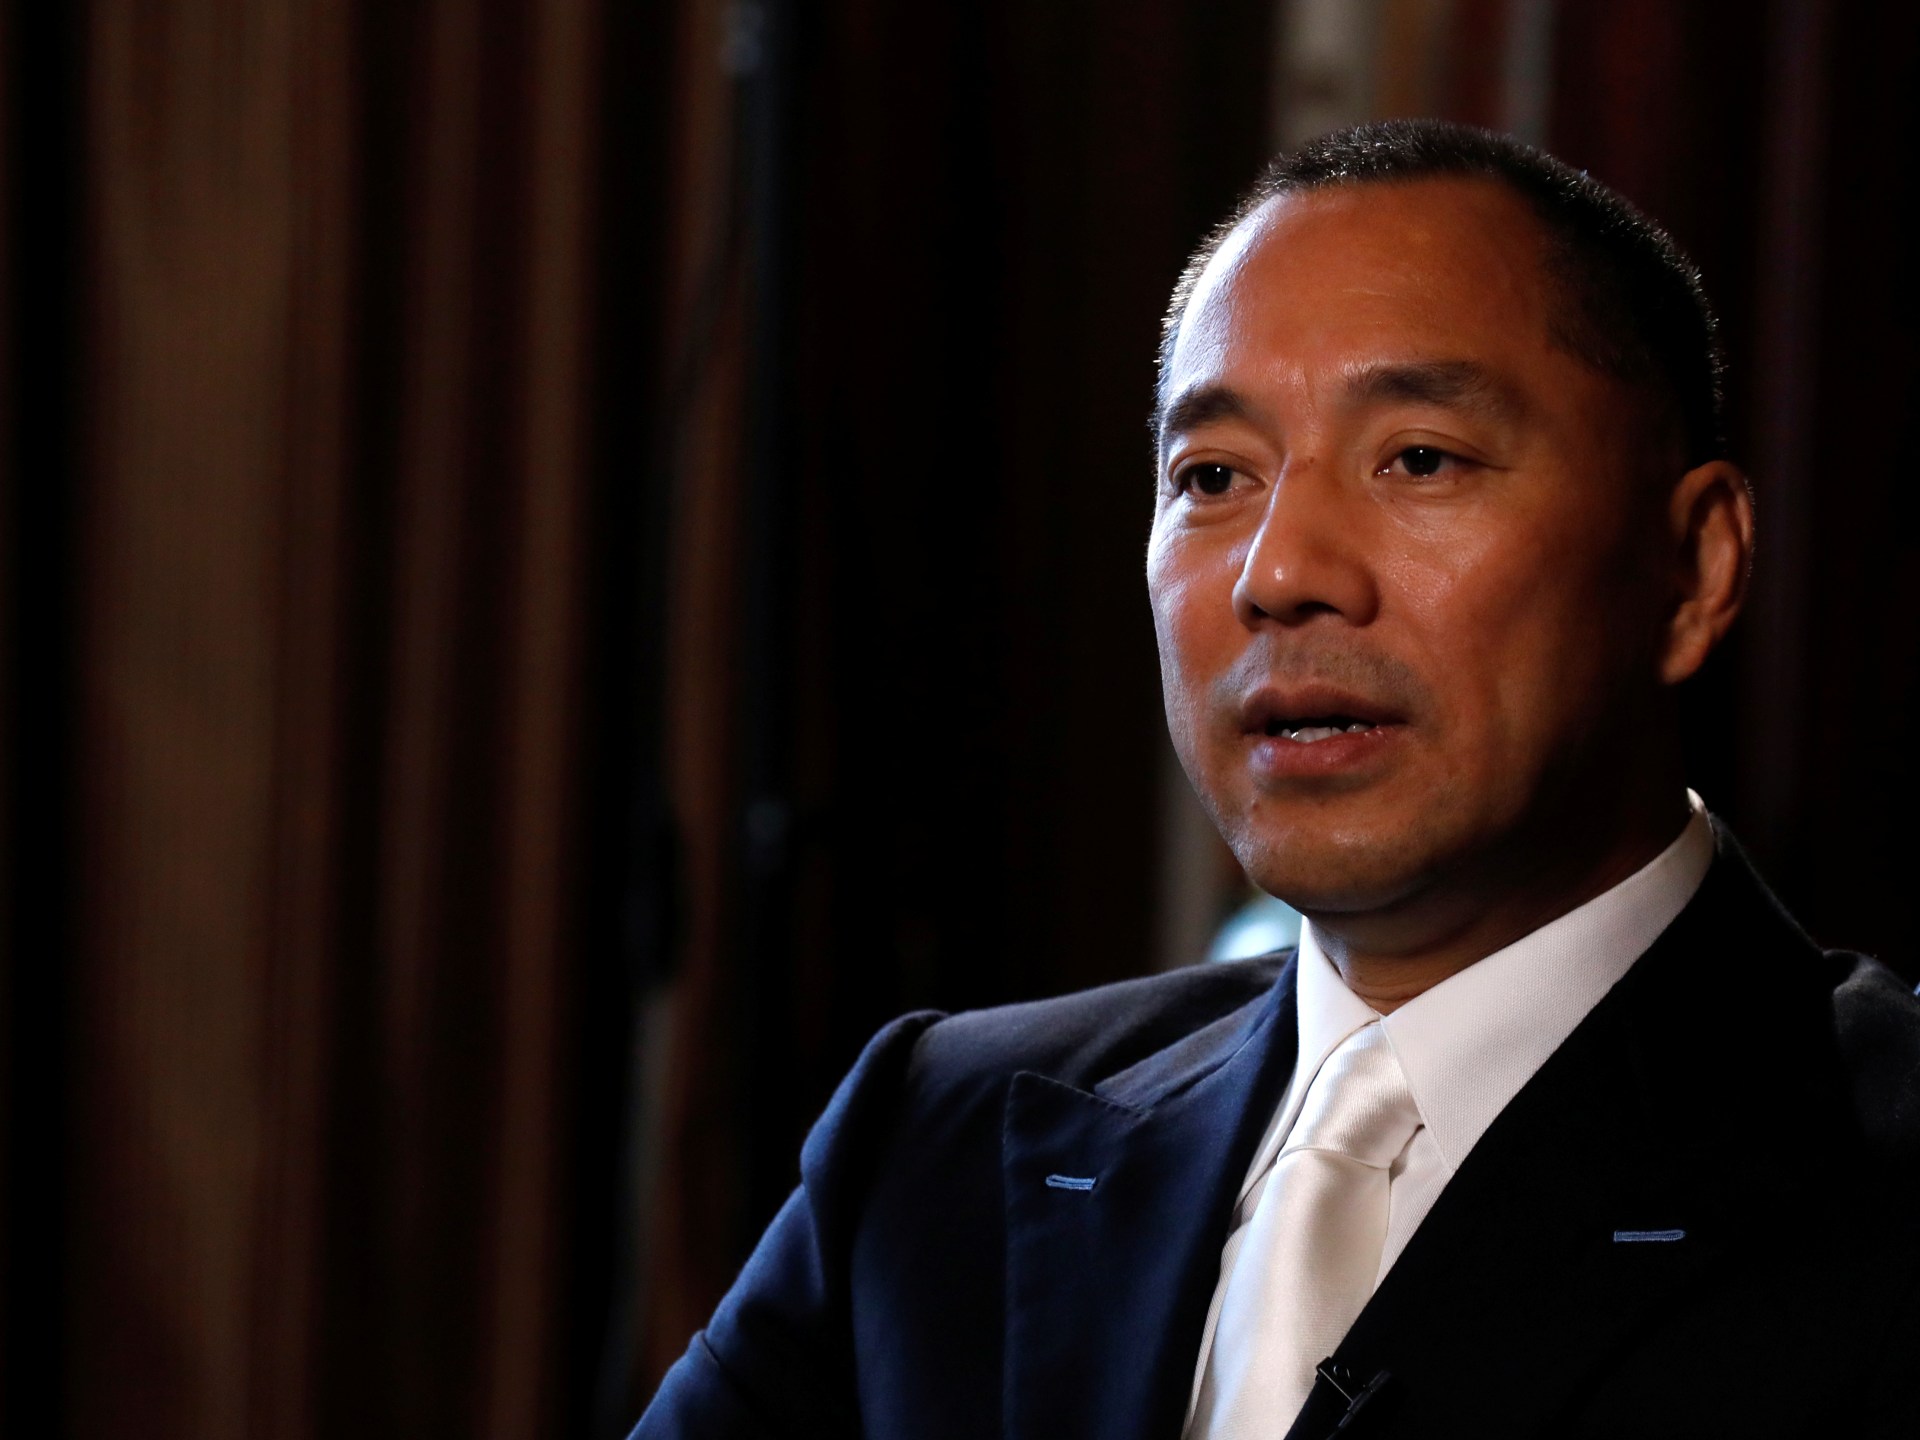 US Charges Chinese Businessman Guo Wengui With Fraud post image